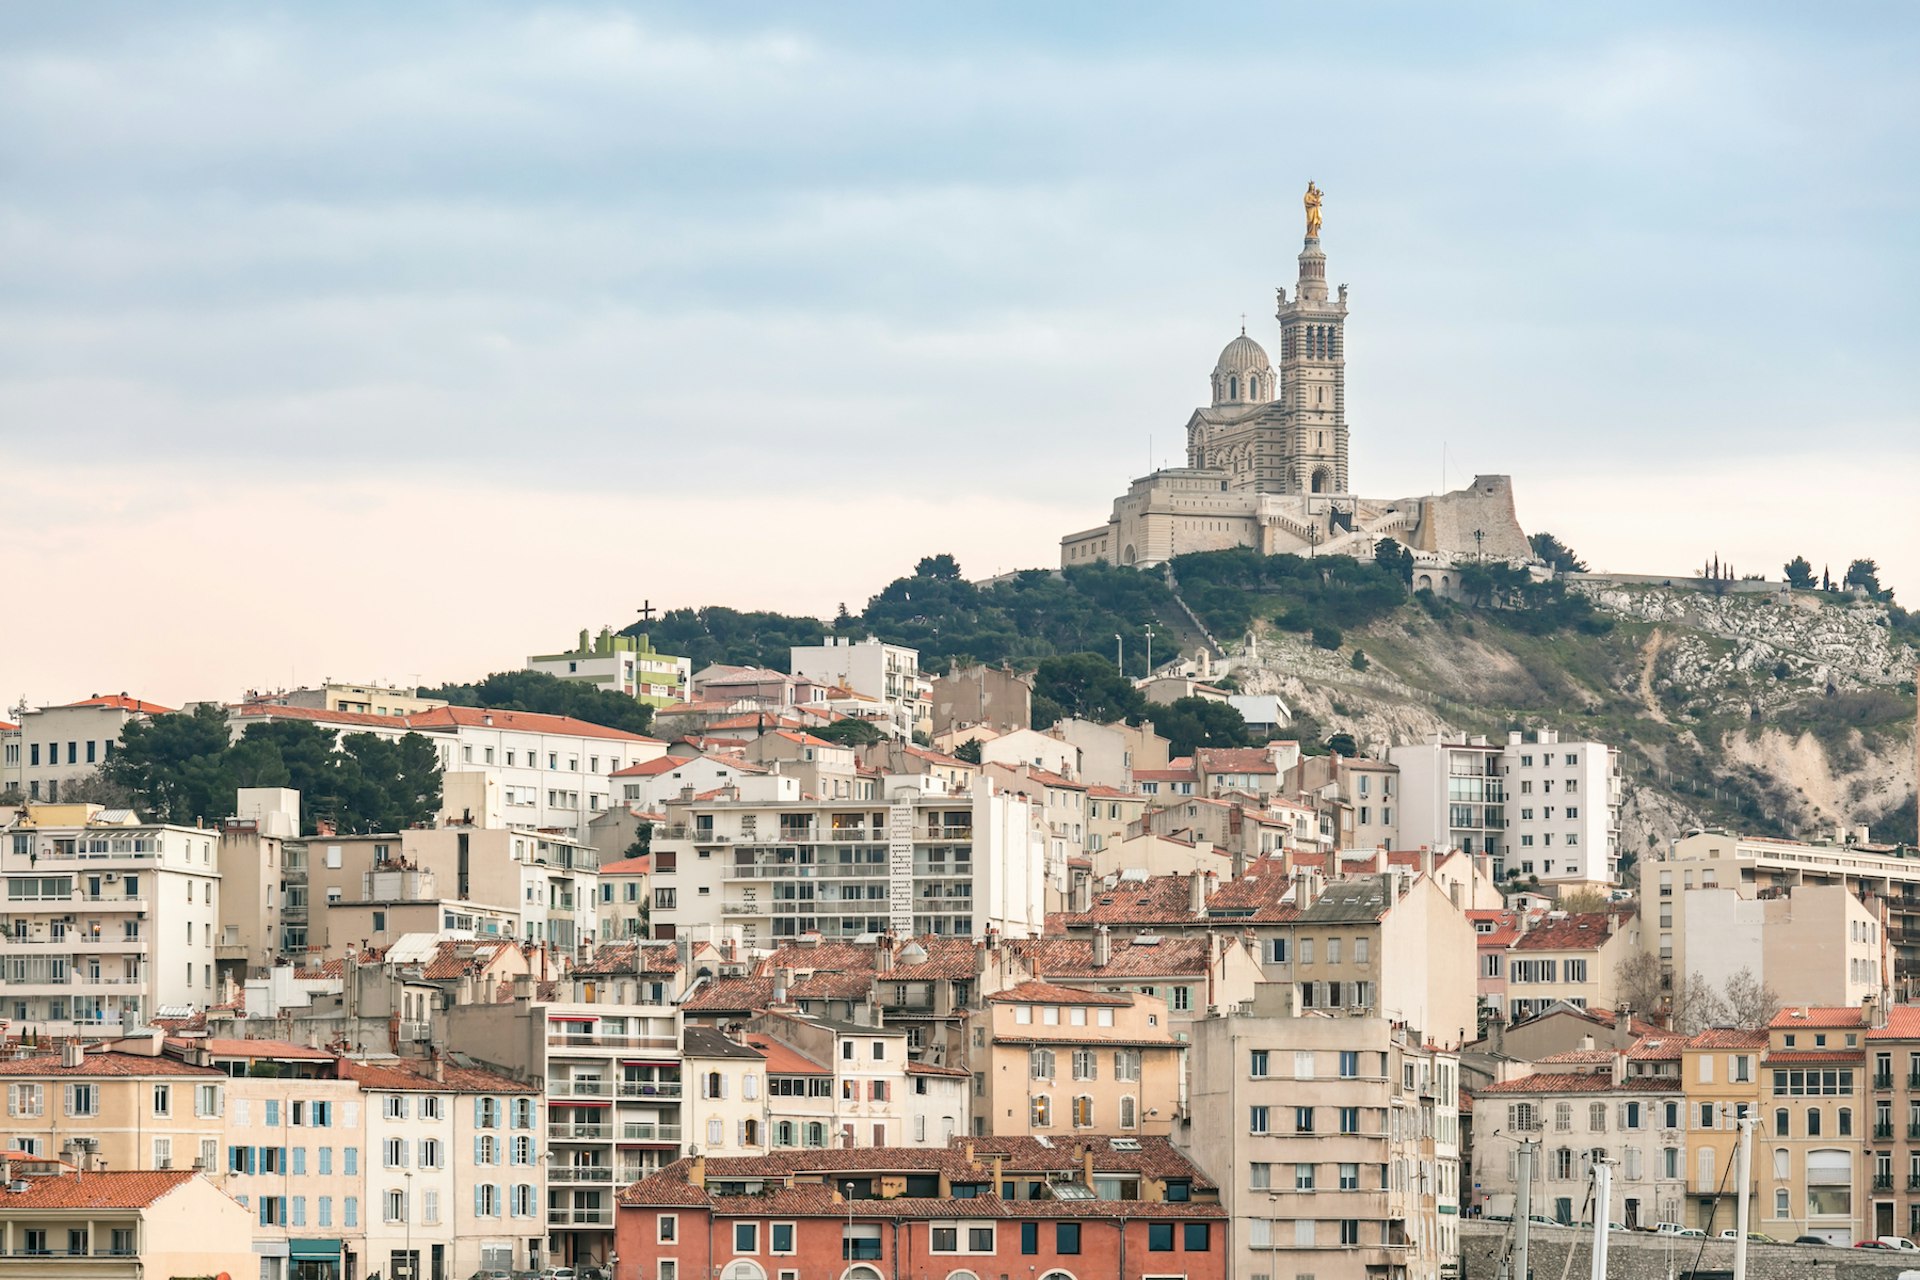 Buildings with Notre Dame de la Garde church on a hill in the distance, Marseille, France